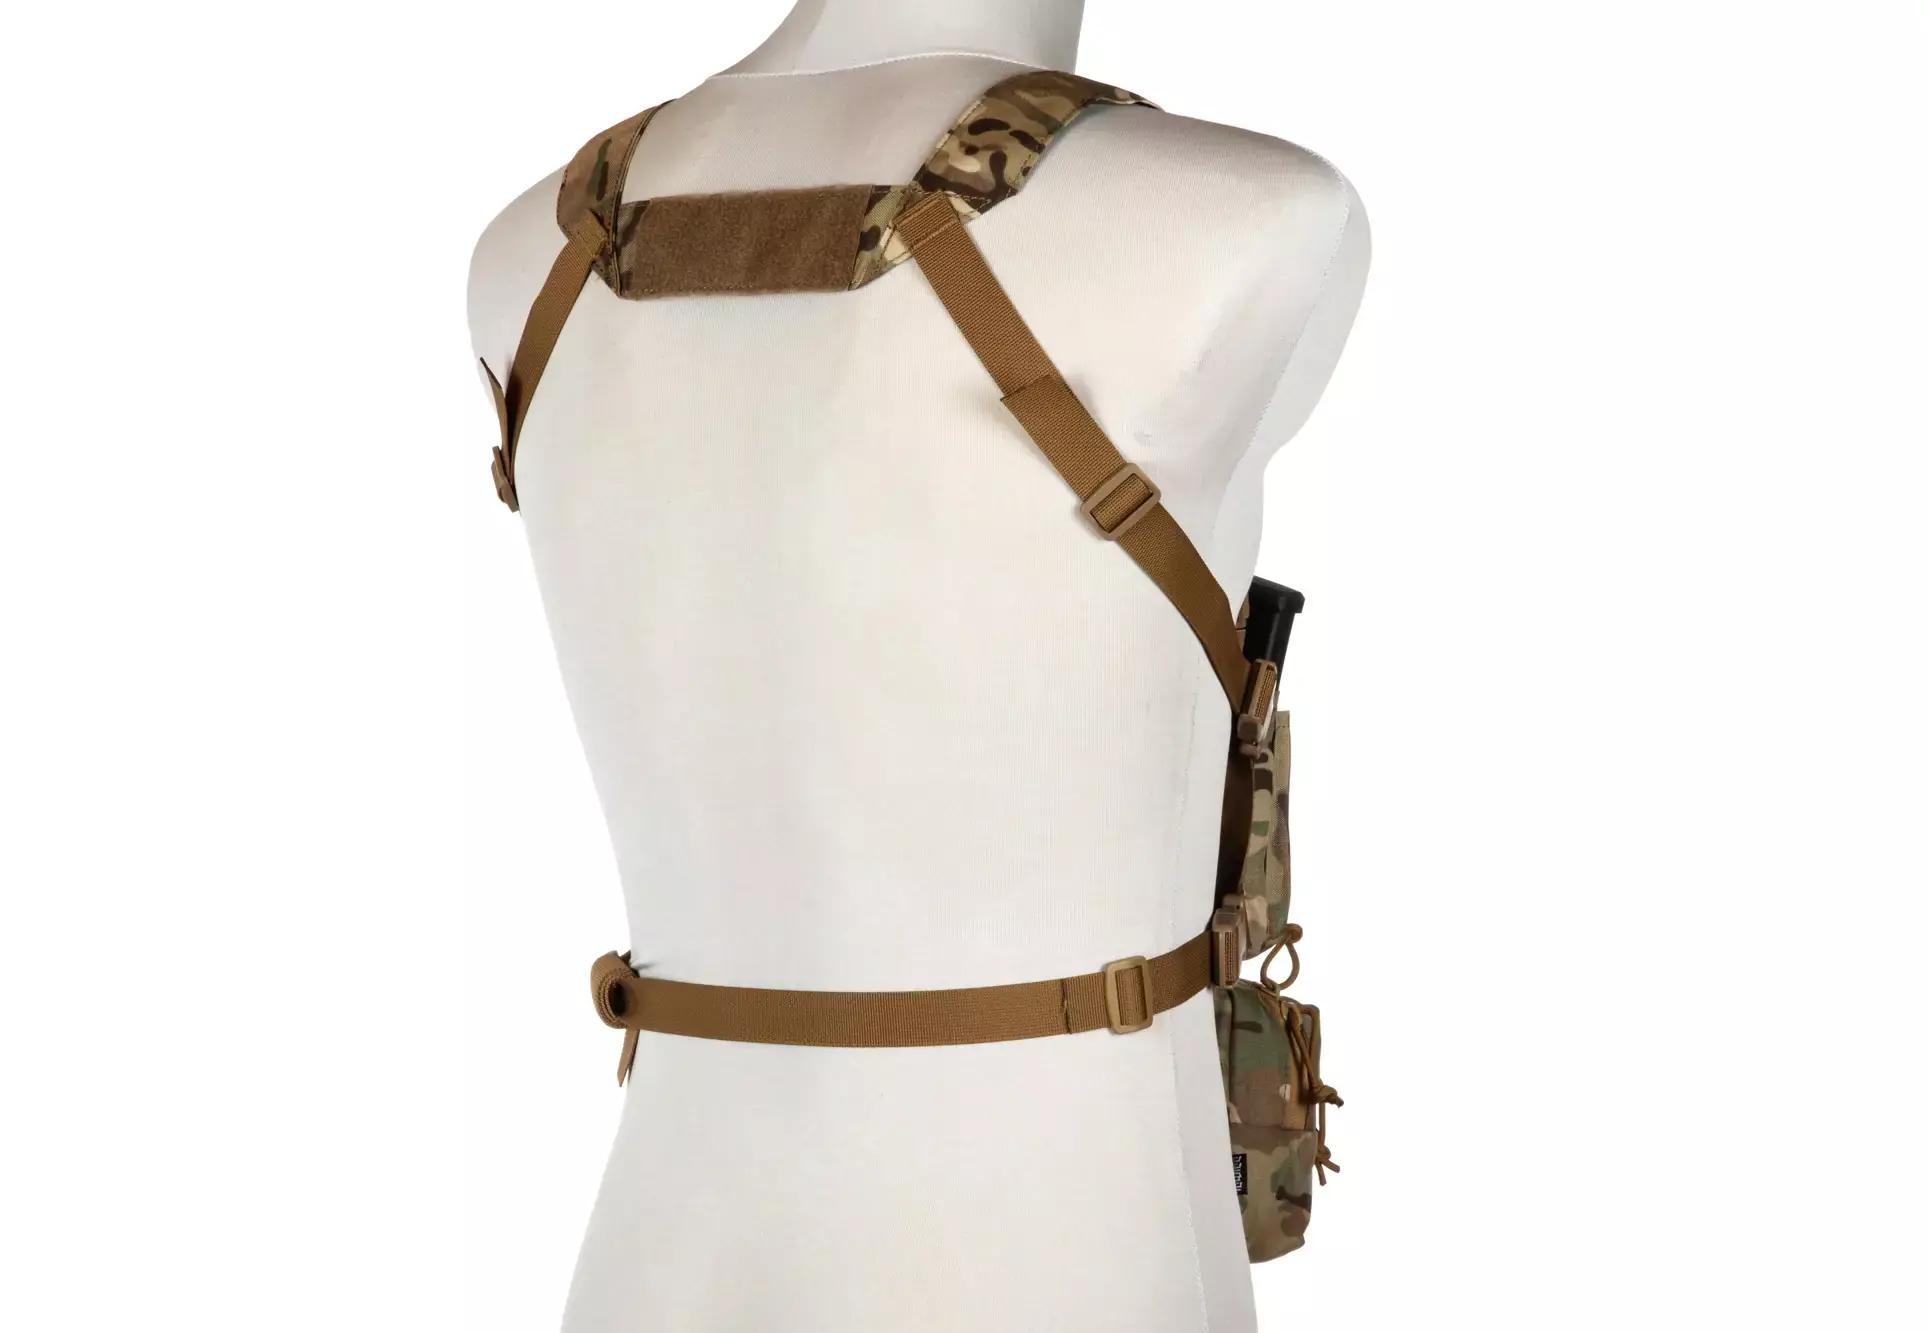 Tactical Chest Rig MK3 Type Sonyks - Multicam® - OnlyAirsoft